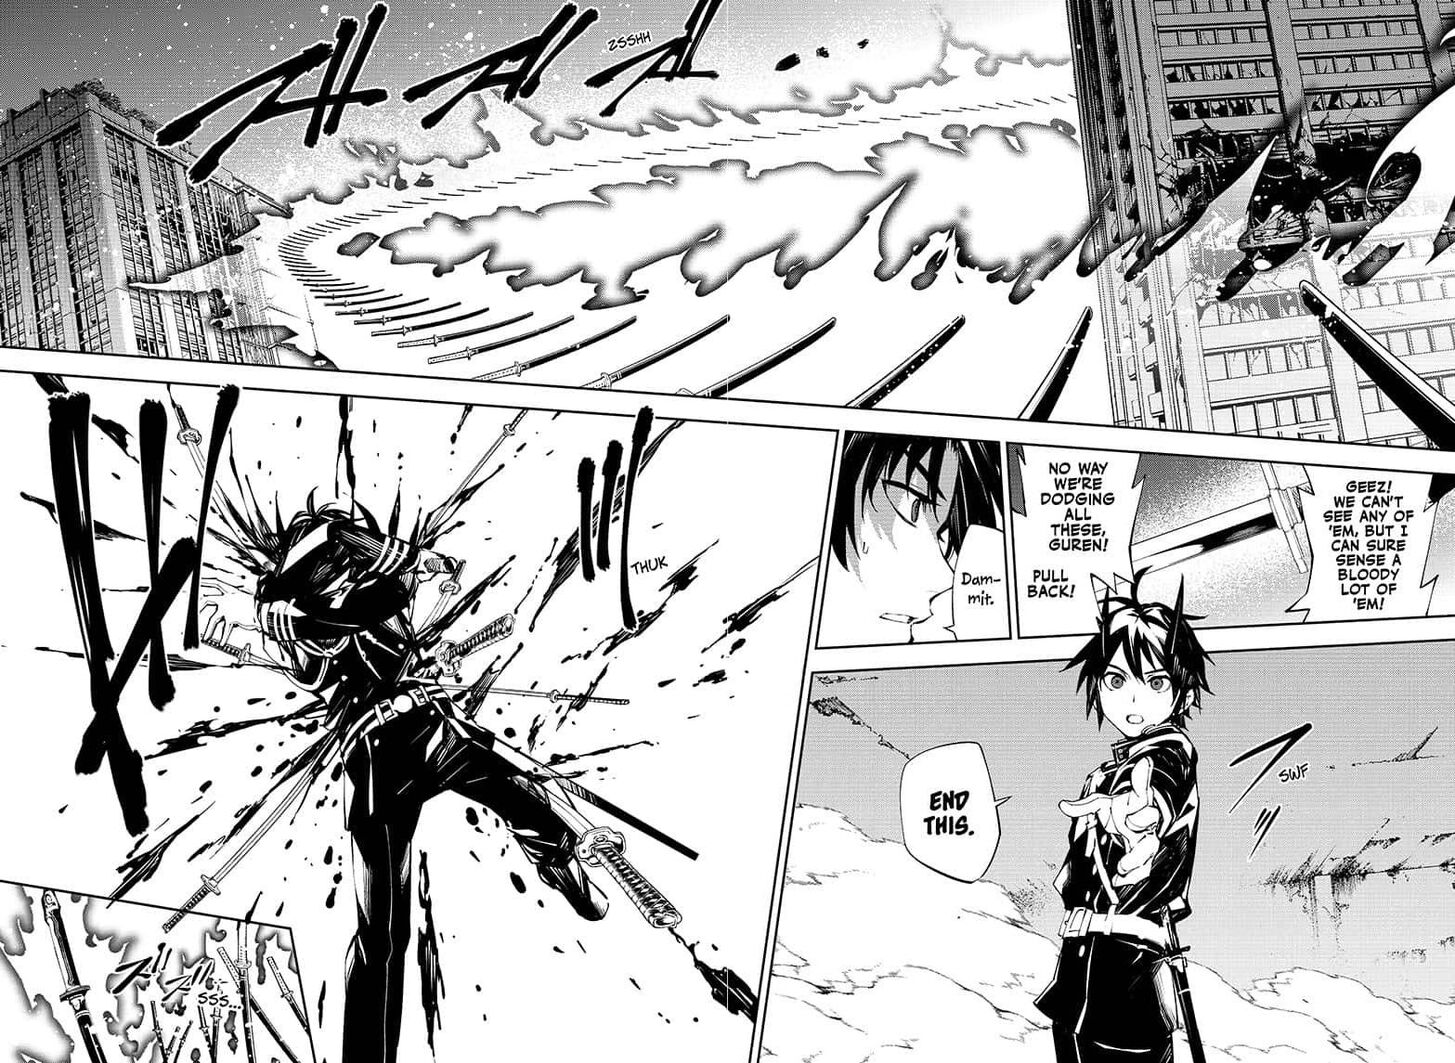 Seraph of the End Manga, Chapter 89